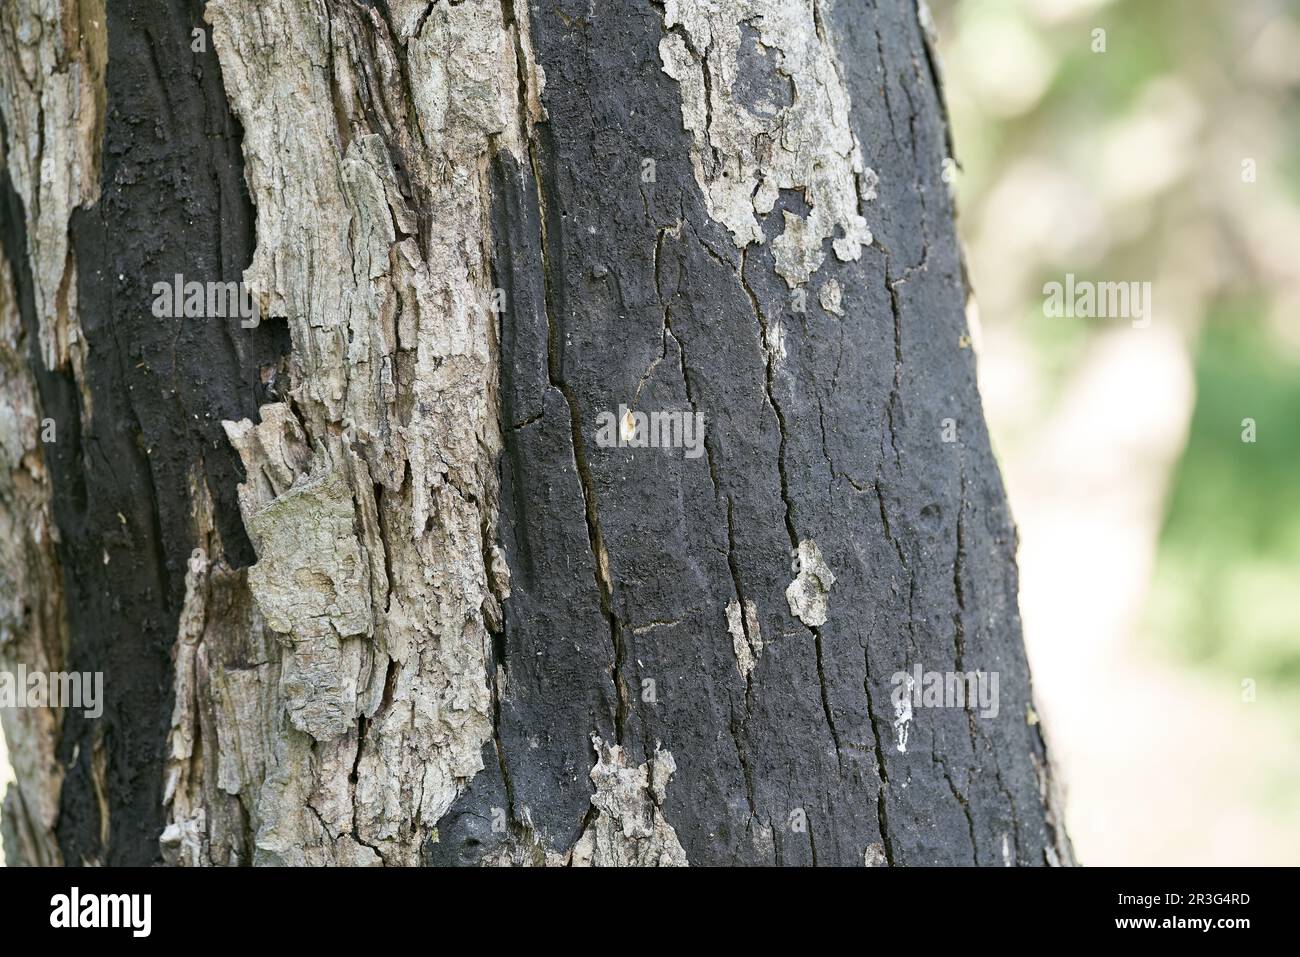 Sooty bark disease RuÃŸrindenkrankheit caused by the fungus Cryptostroma corticale on a dead tree Stock Photo